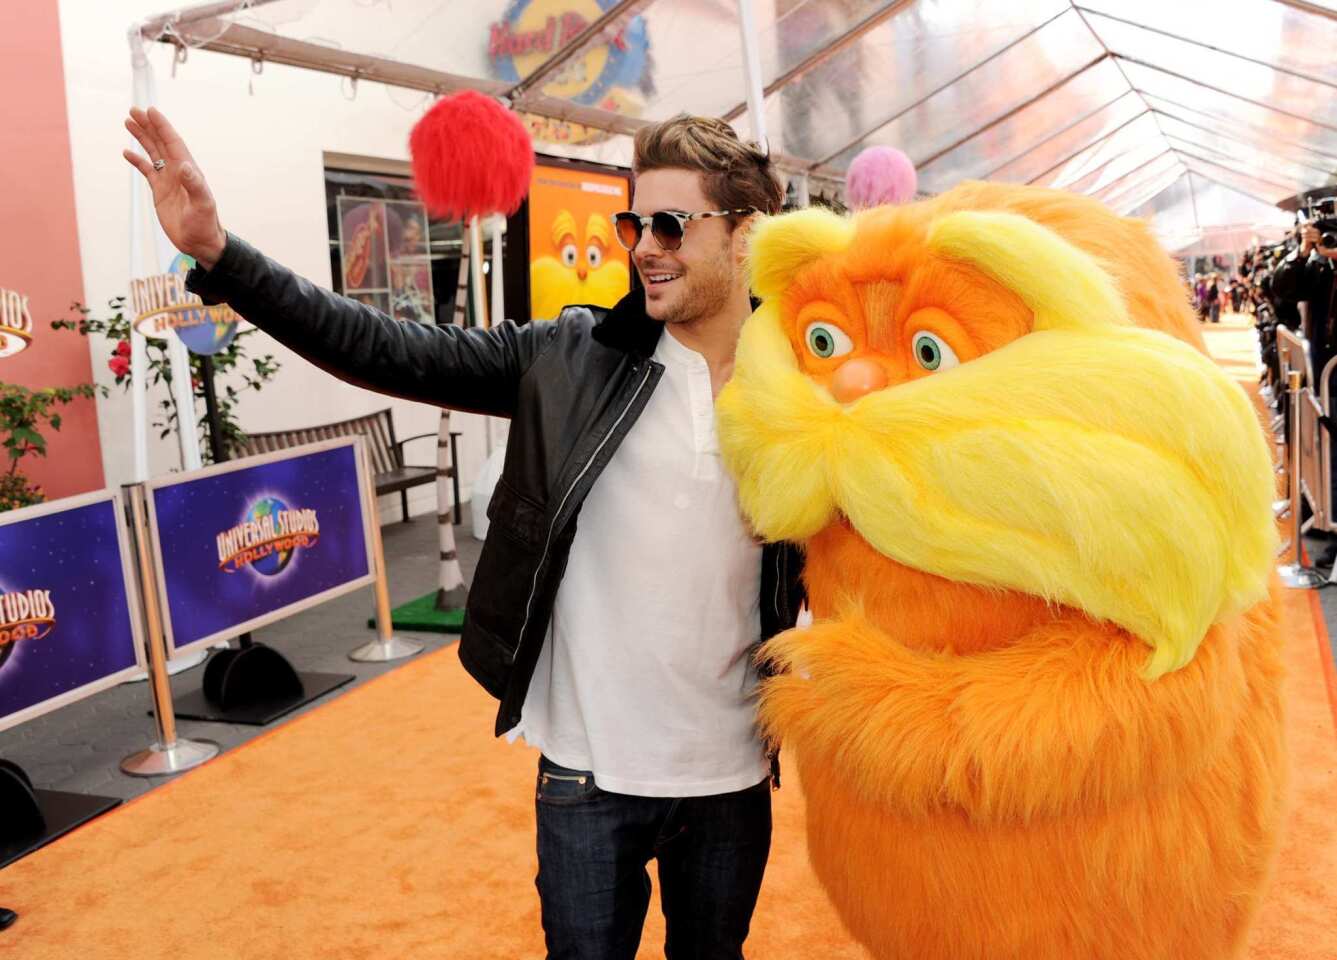 Zac Efron and the cast of "The Lorax" hit the red carpet at Universal City on Feb. 19 to celebrate the opening of the new Dr. Seuss children's movie. Efron provides the voice of Ted, a 12-year-old boy from the artificial town of Thneed-Ville who sets out in search of real trees to impress a girl.